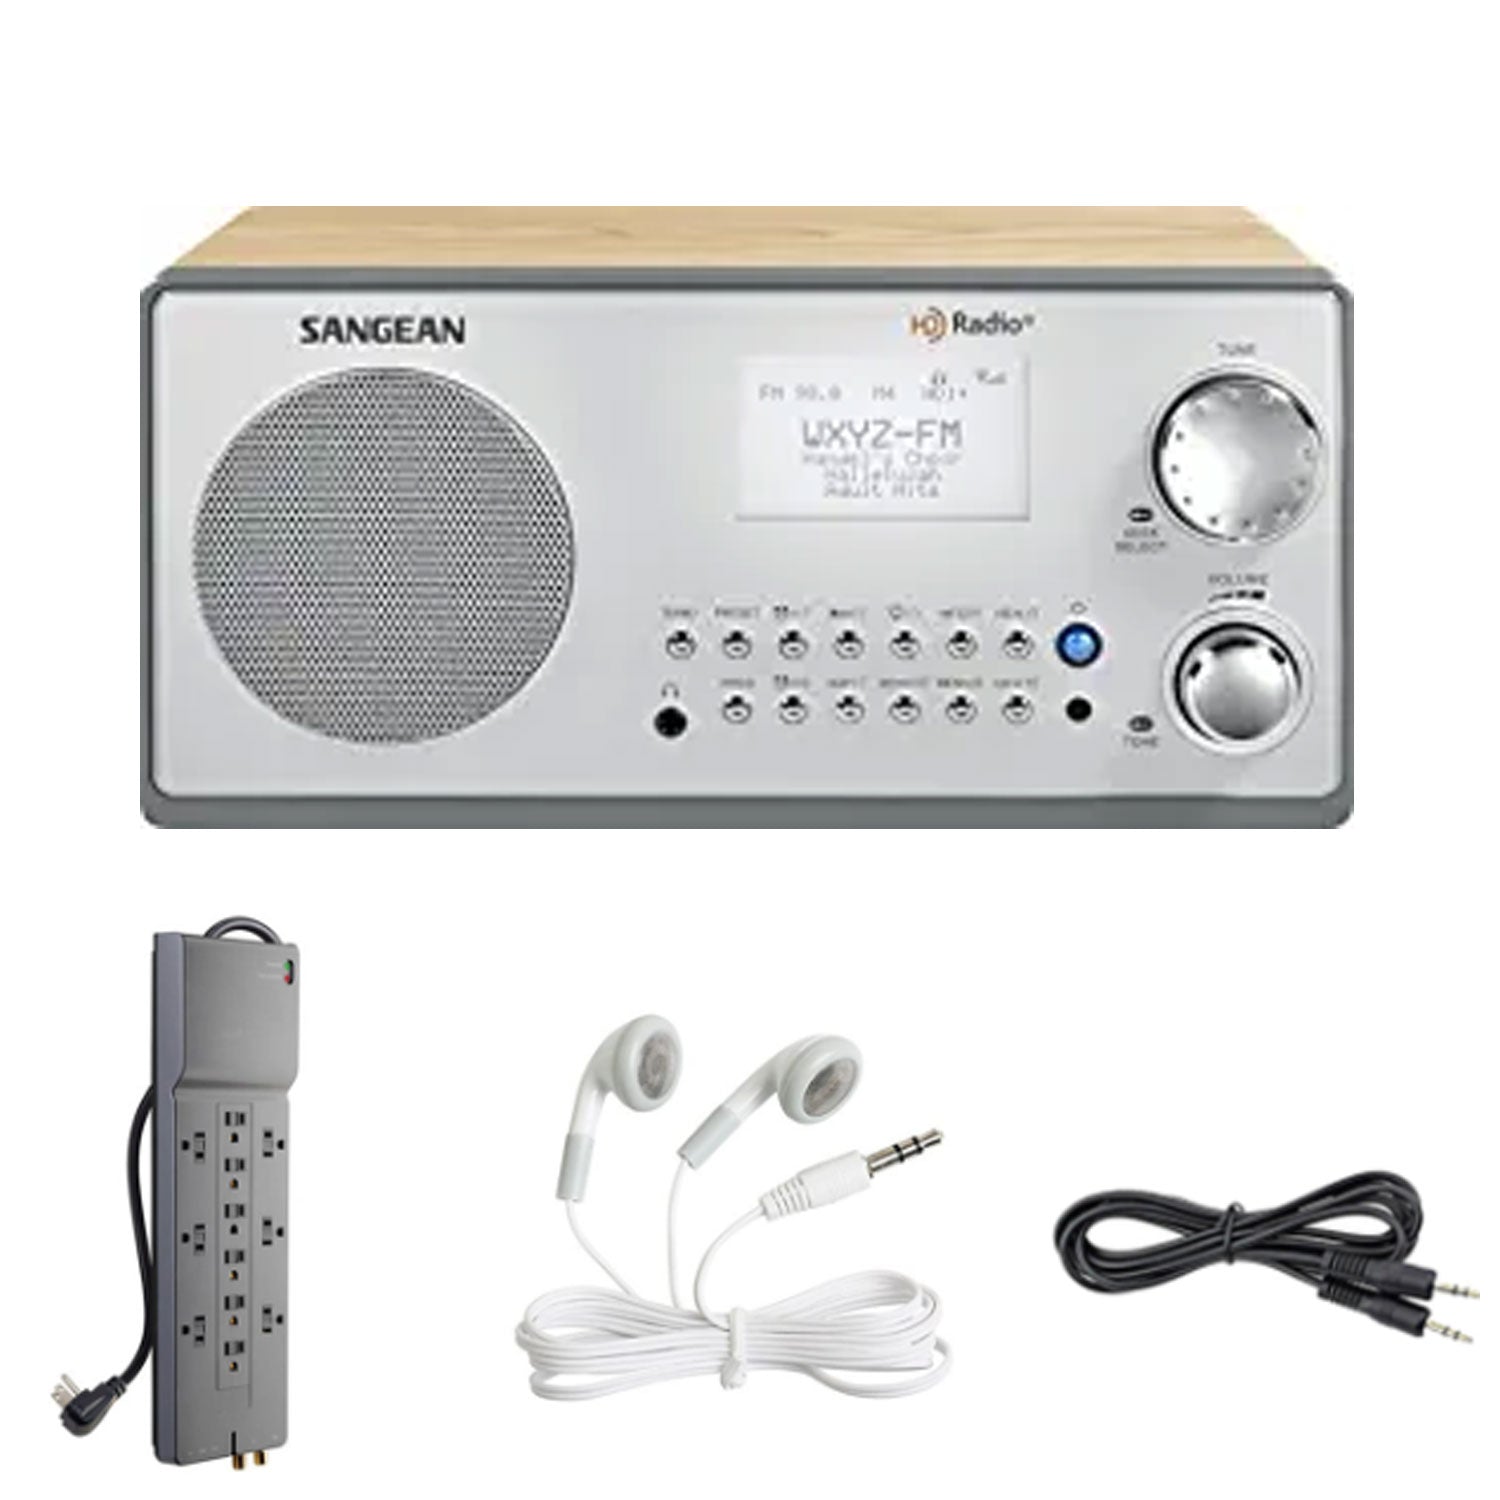 Sangean HD Radio/FM-Stereo/AM Wooden Cabinet Table Top Radio  - Kit with Aux Cable and More